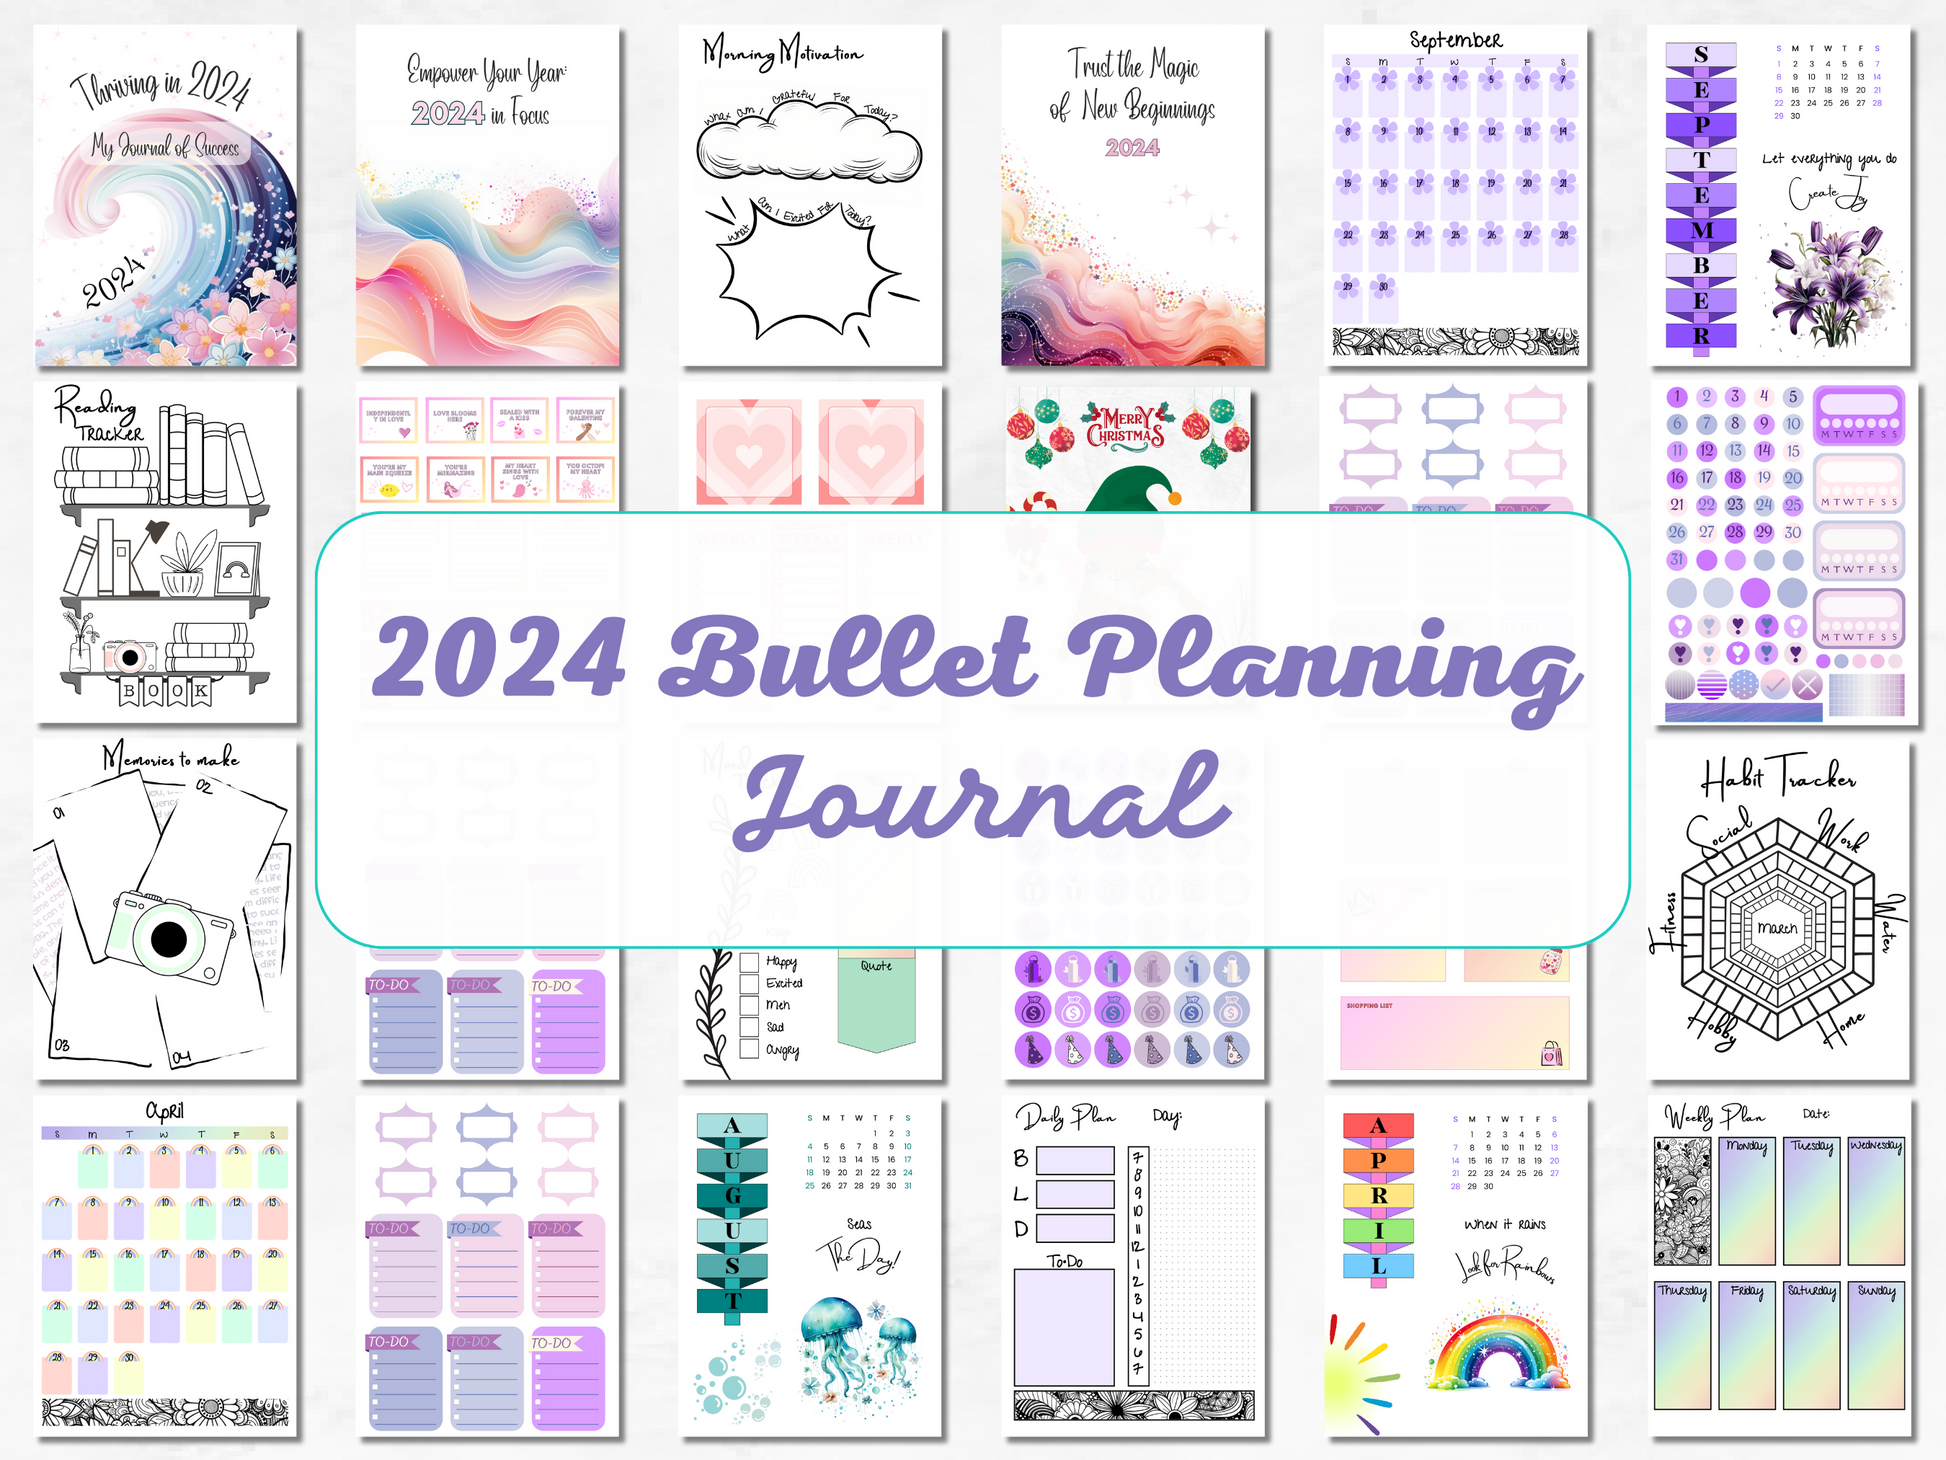 Bullet Journal Planning Journal printaable journal for the year, 